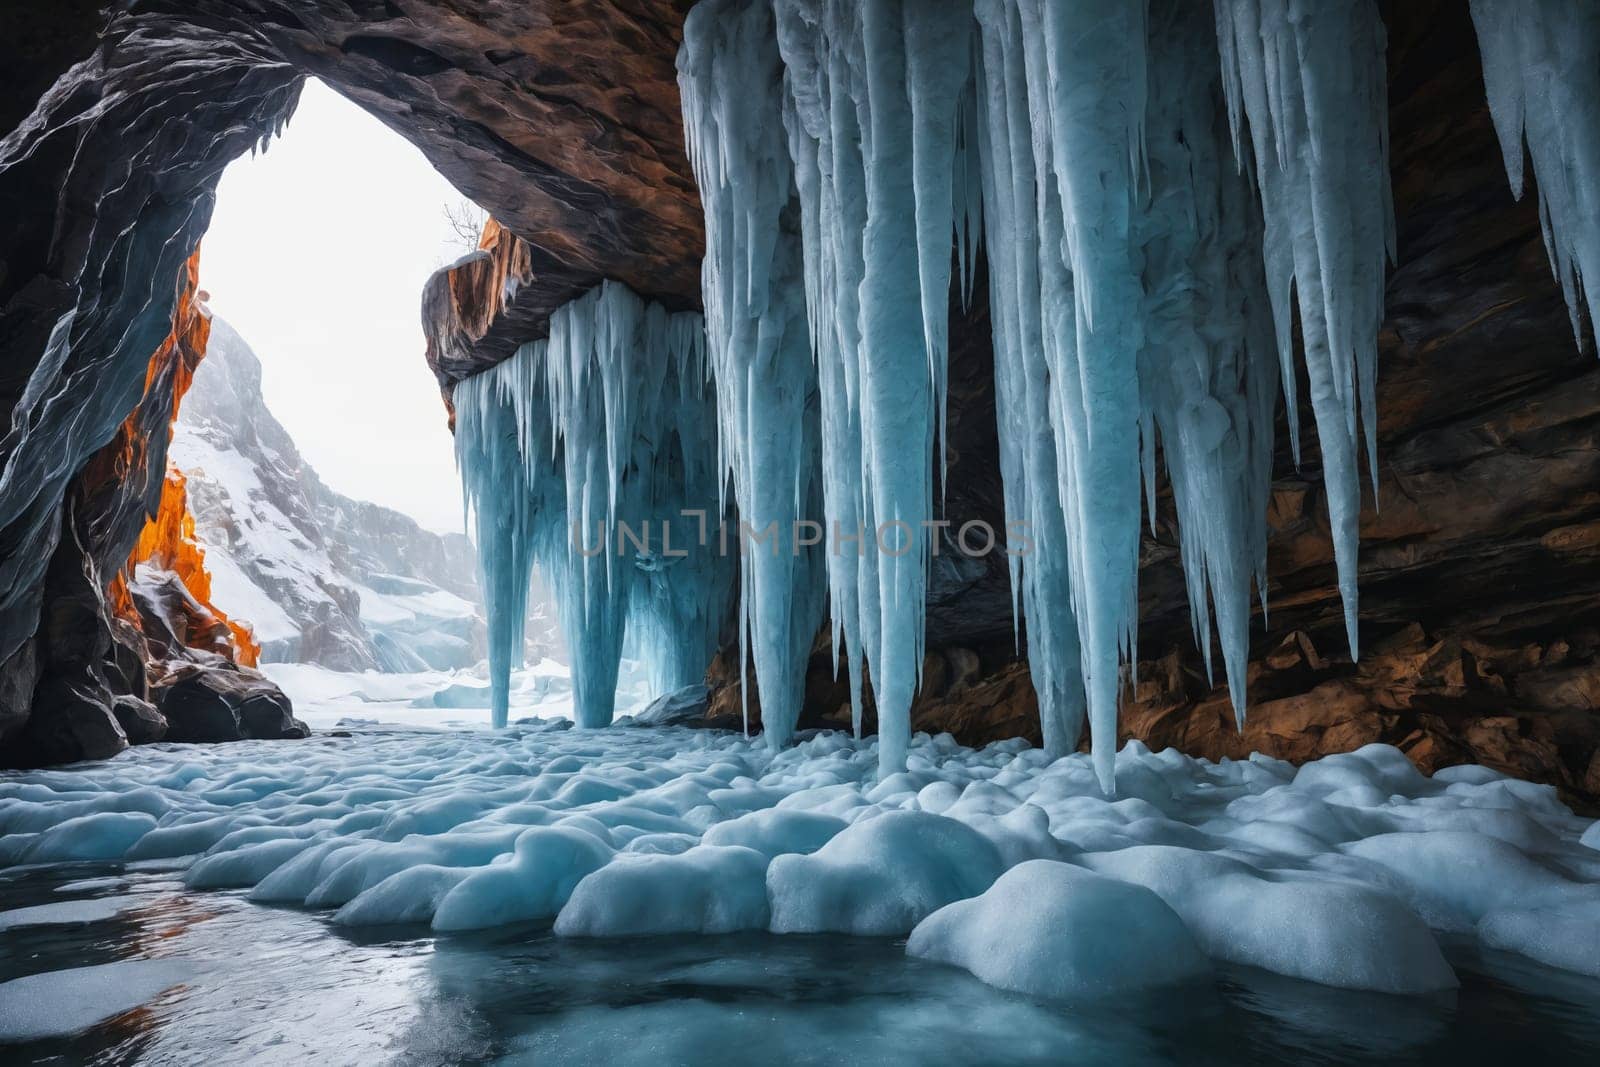 Frozen Depths: Majestic Icicle Cavern with Subterranean Lake by Andre1ns